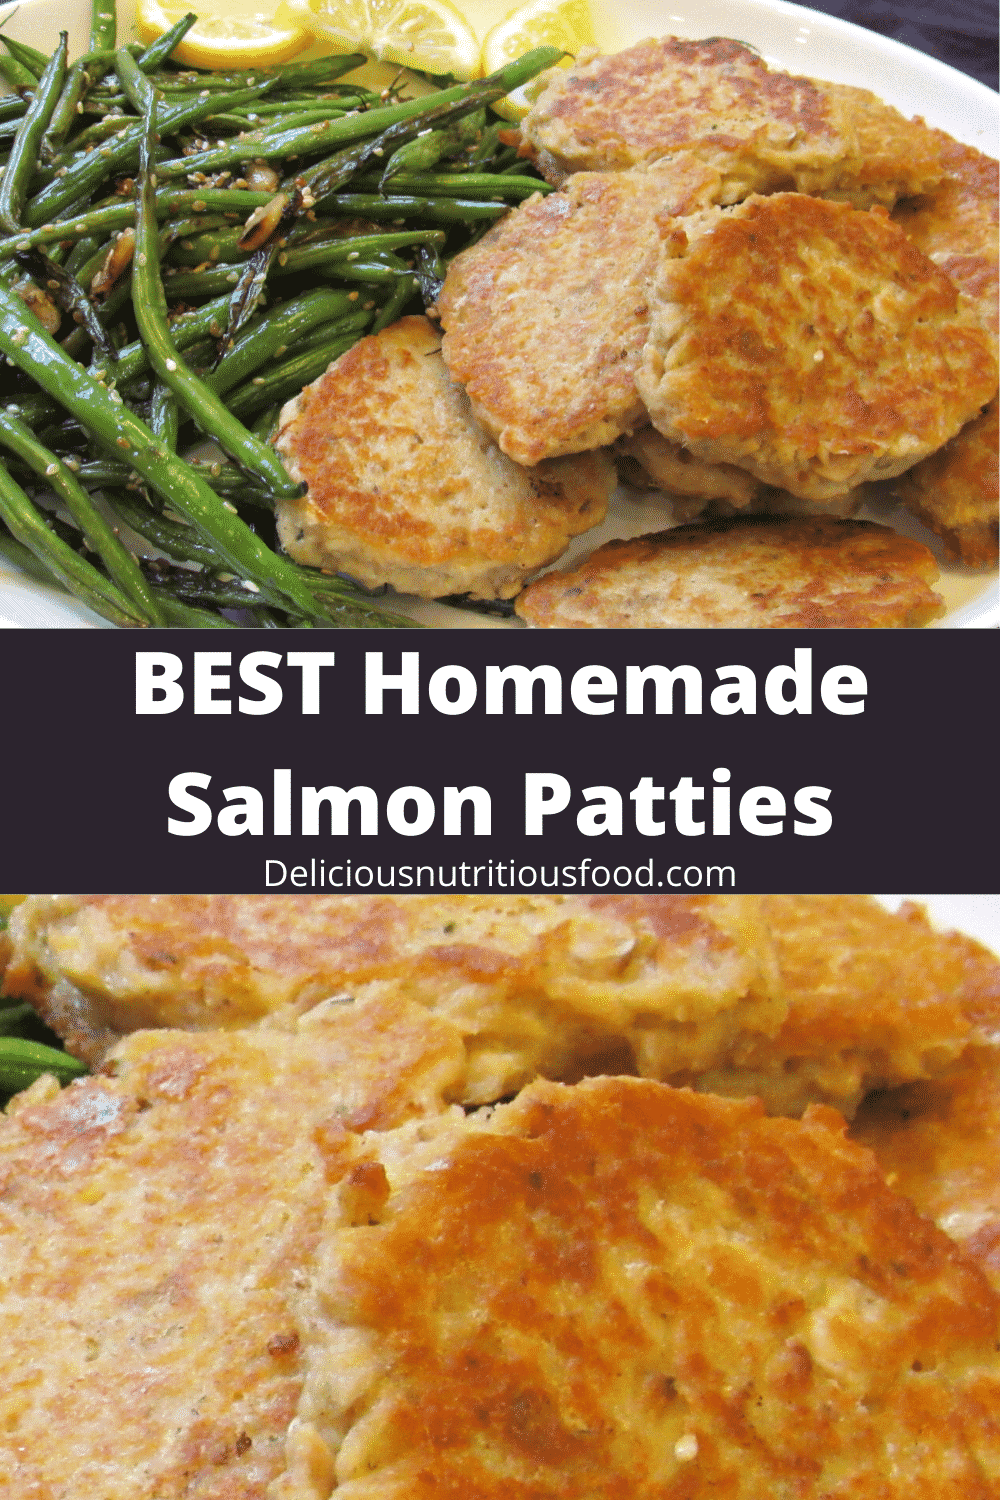 salmon patties are served with green beans on a white platter.